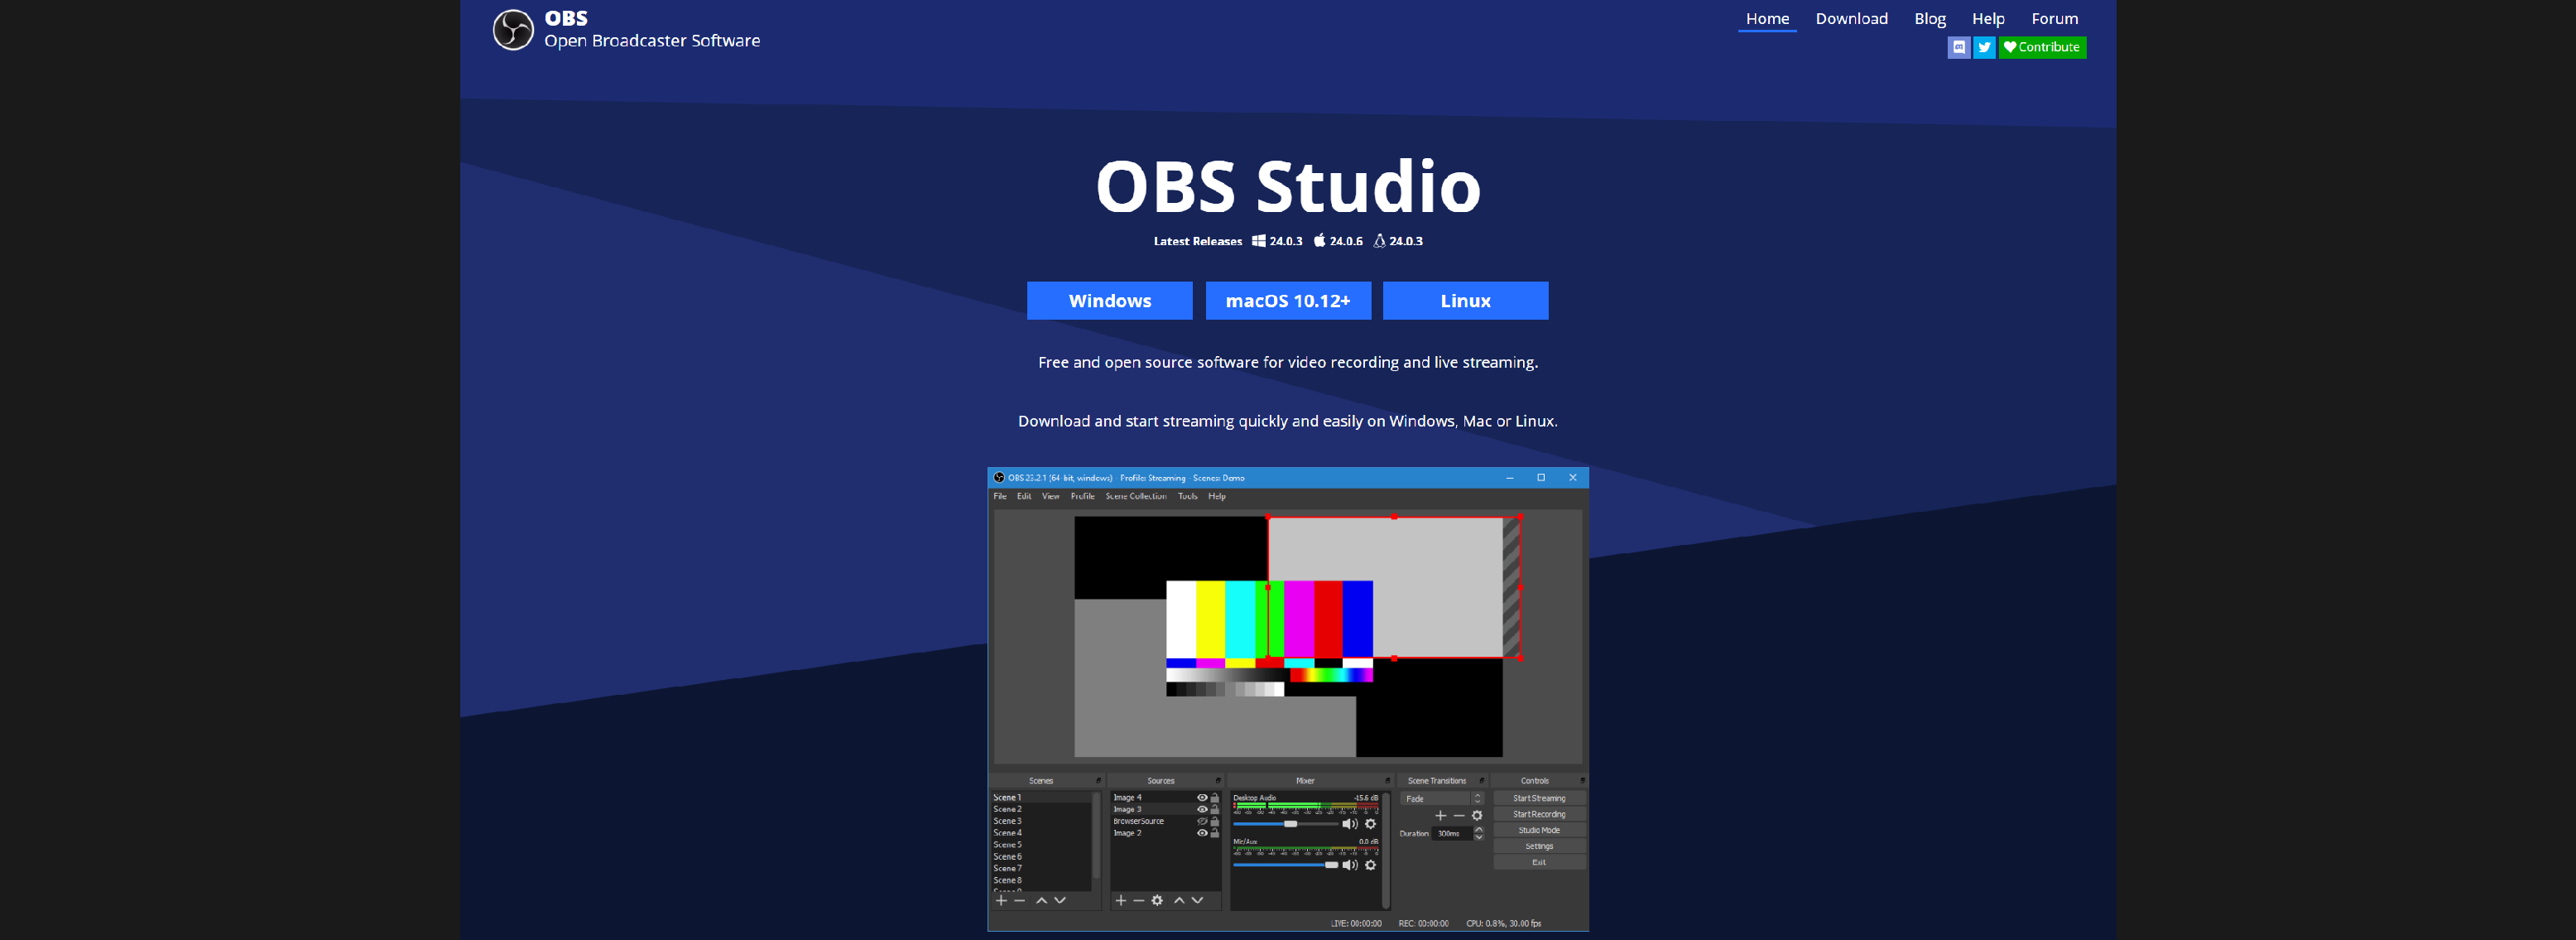 obs download windows 8.1